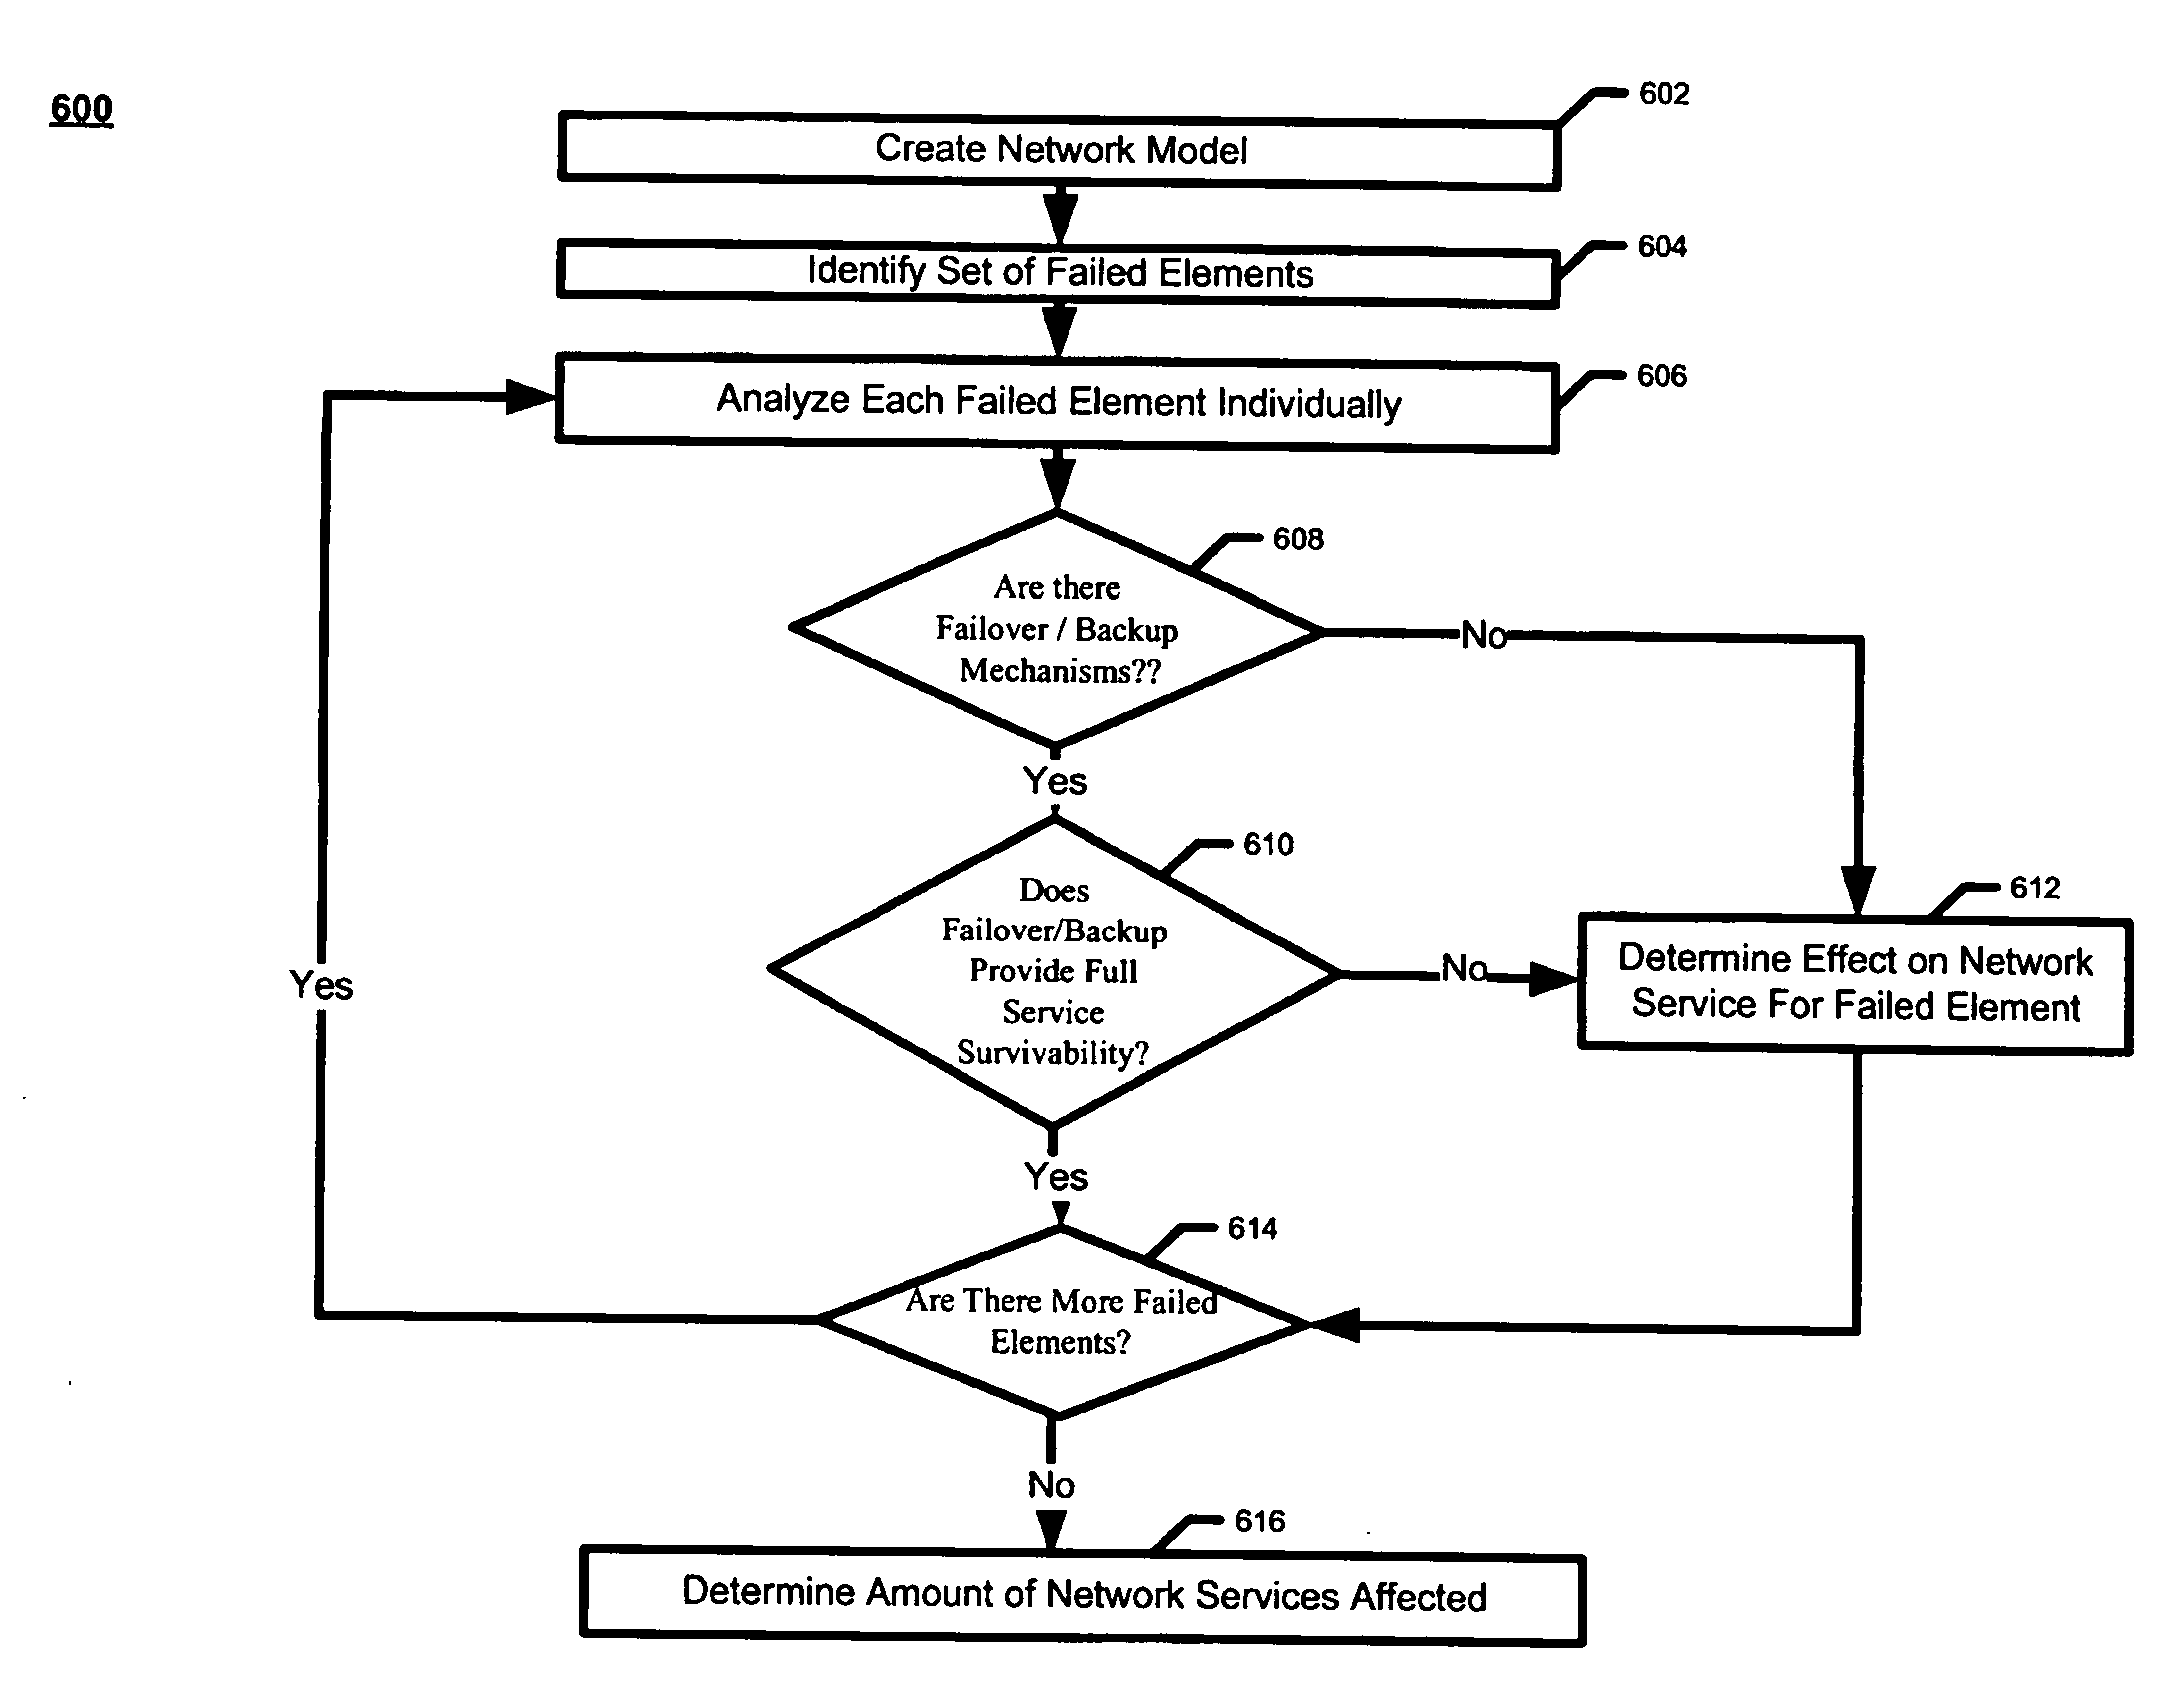 Multi-layered Model for Survivability Analysis of Network Services